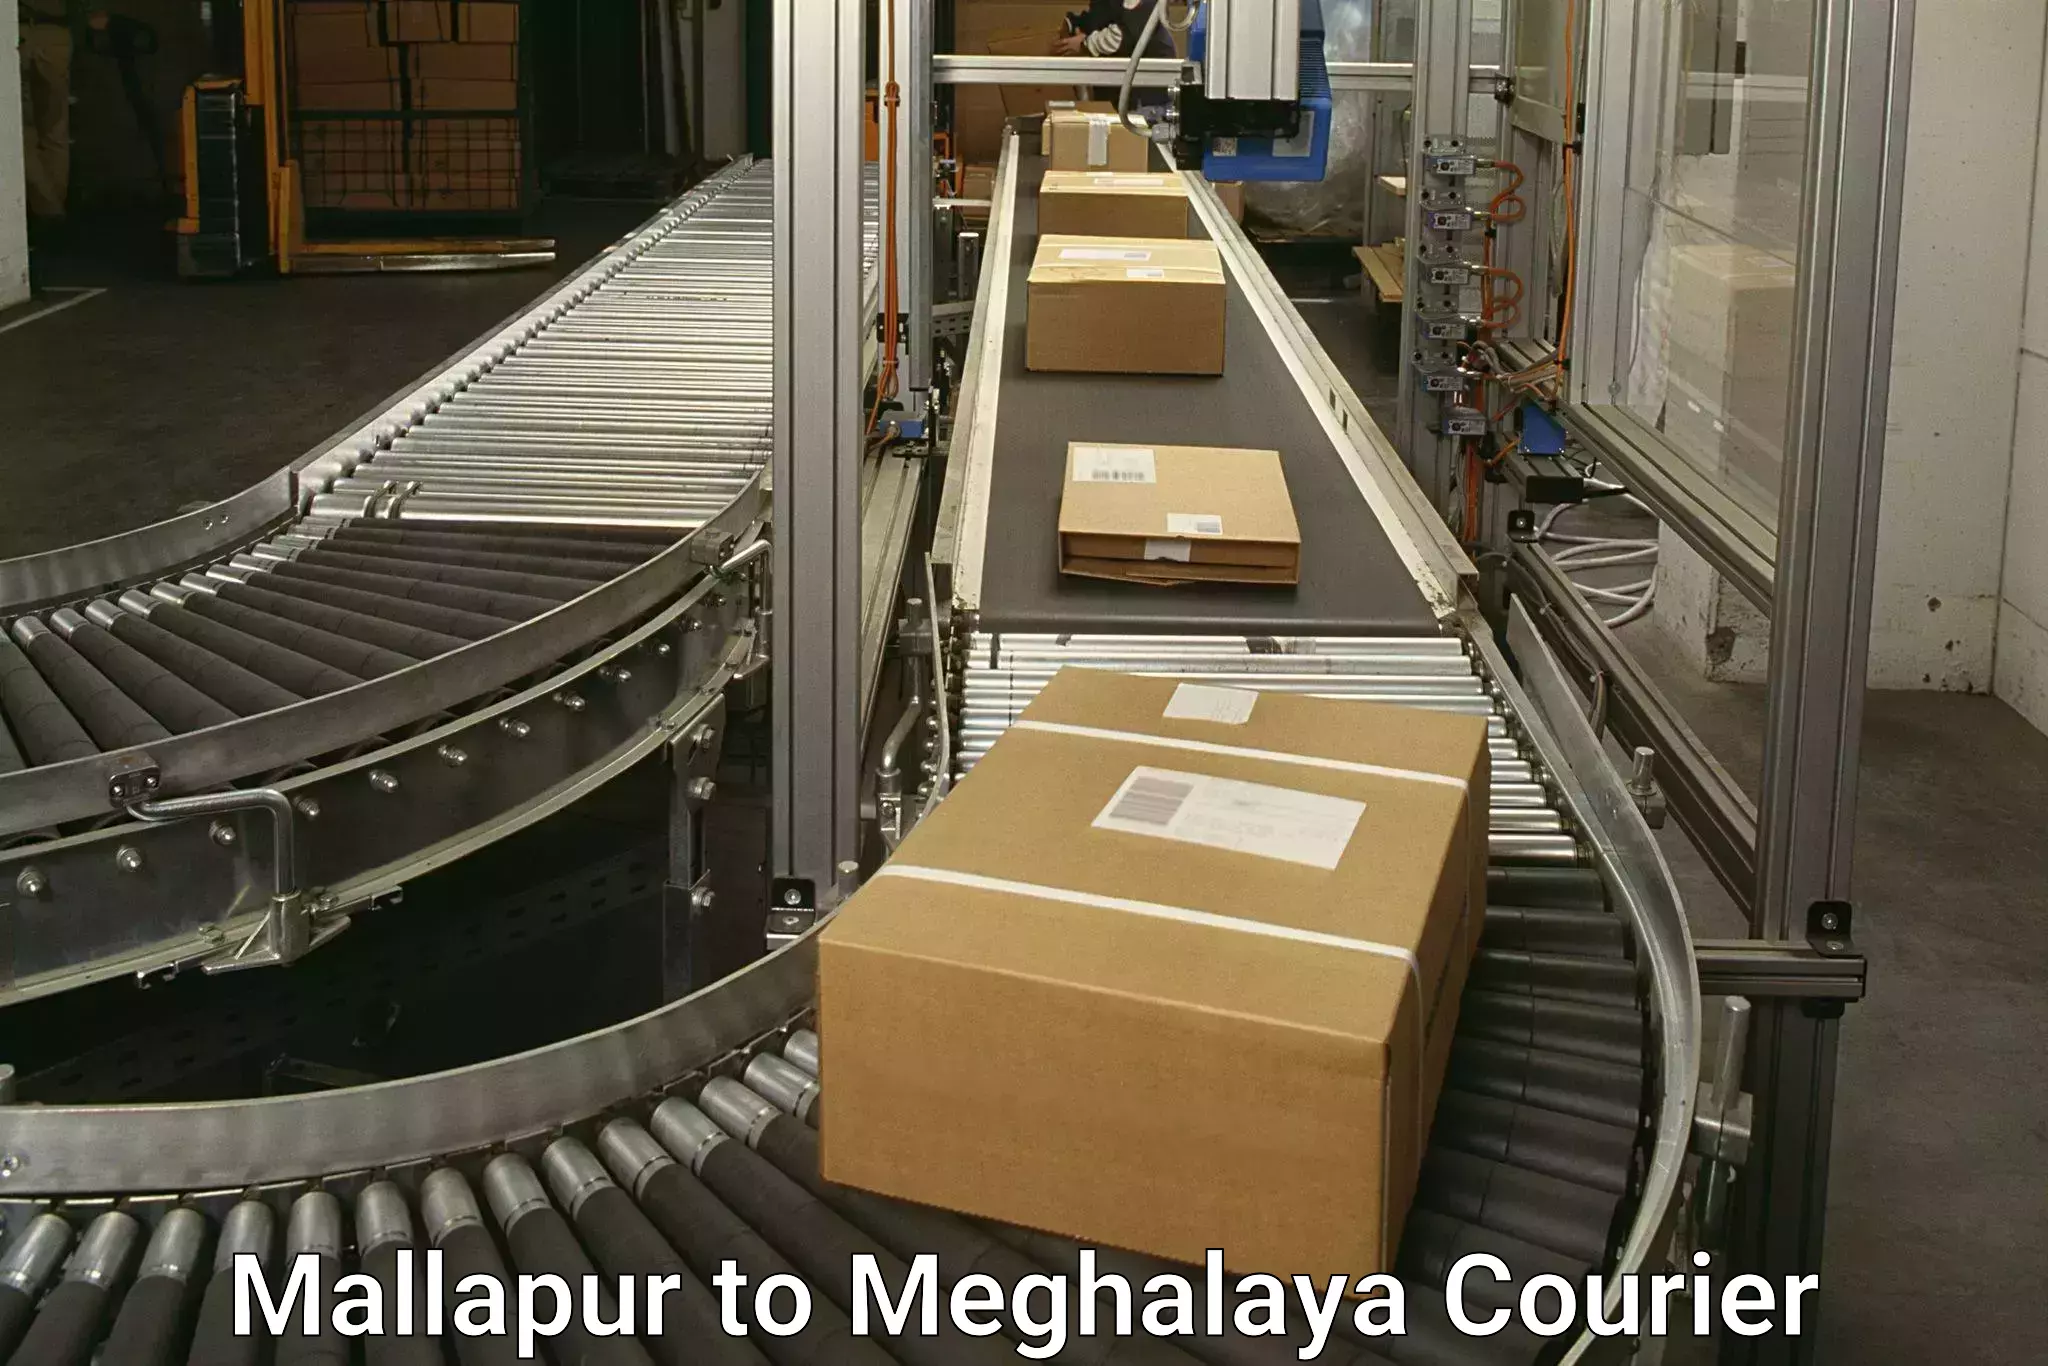 Automated parcel services Mallapur to Shillong